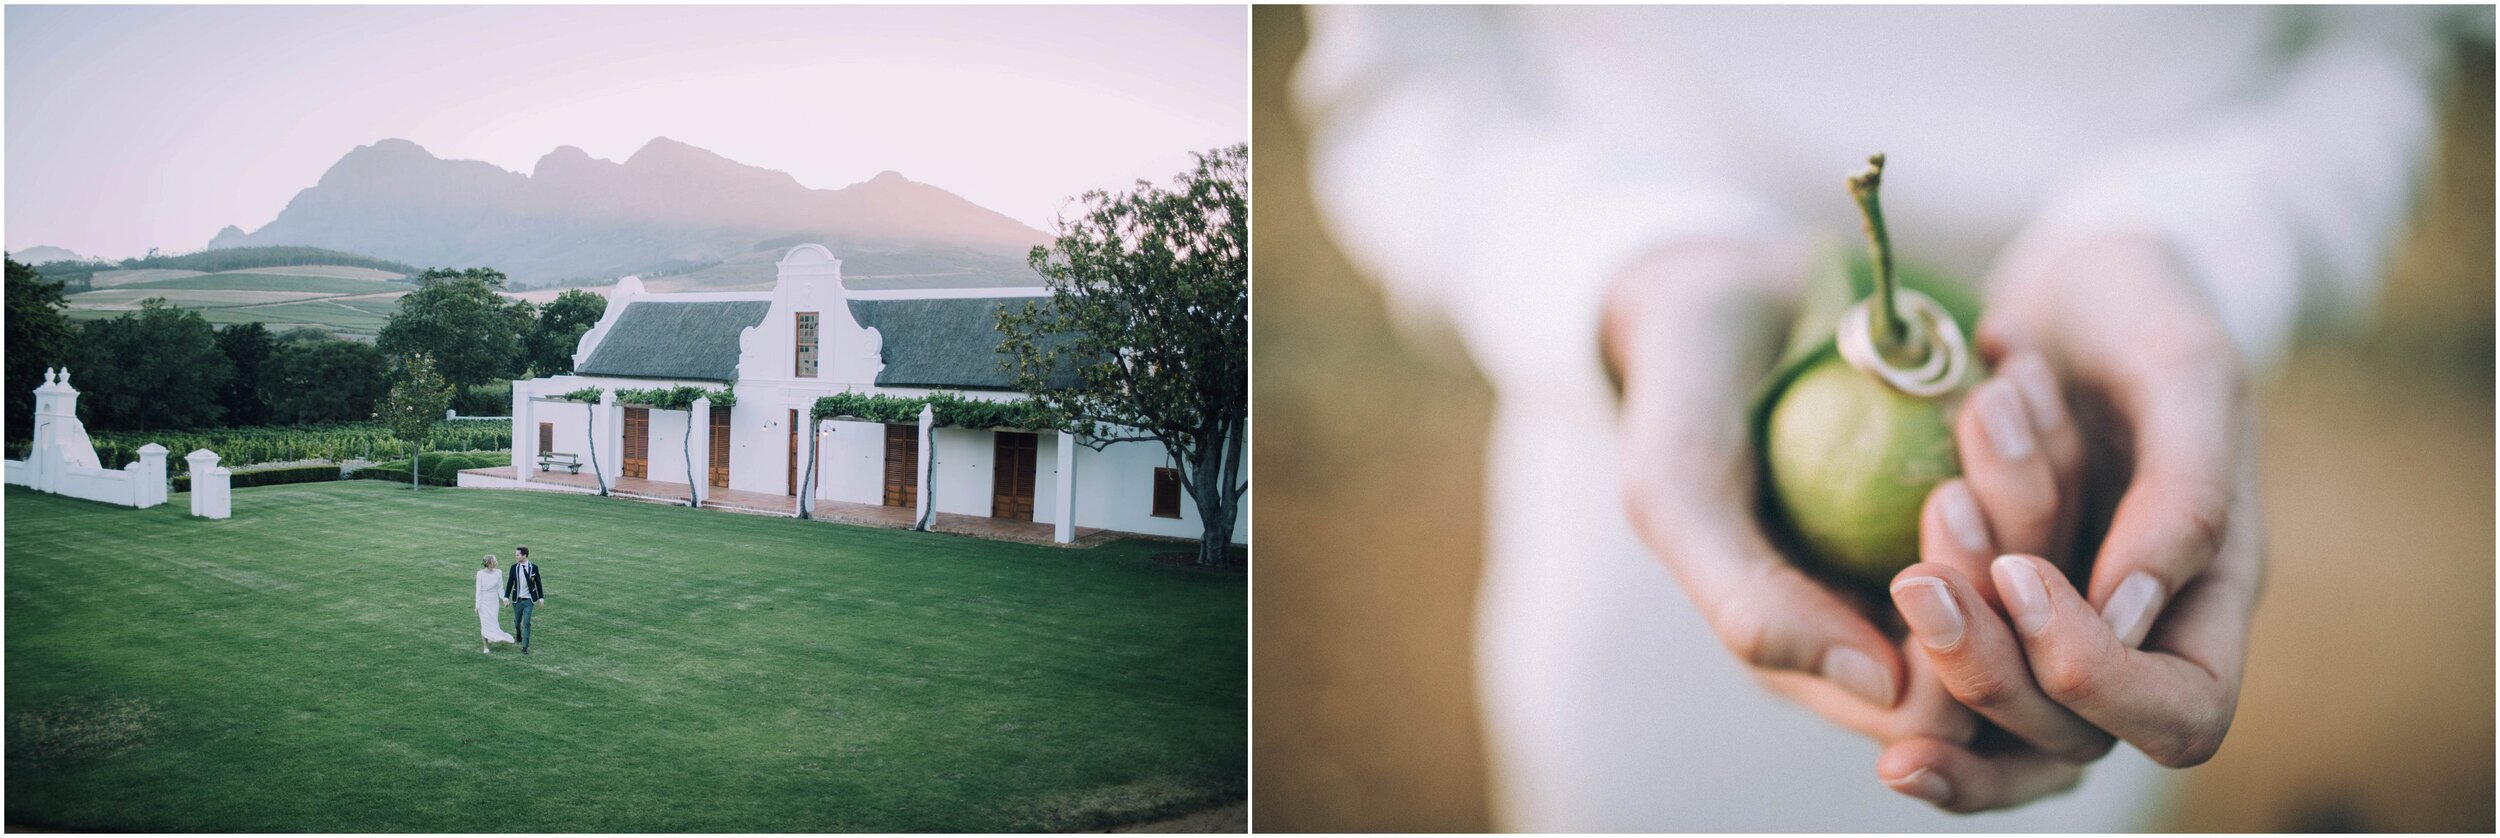 Top Wedding Photographer Cape Town South Africa Artistic Creative Documentary Wedding Photography Rue Kruger_2248.jpg